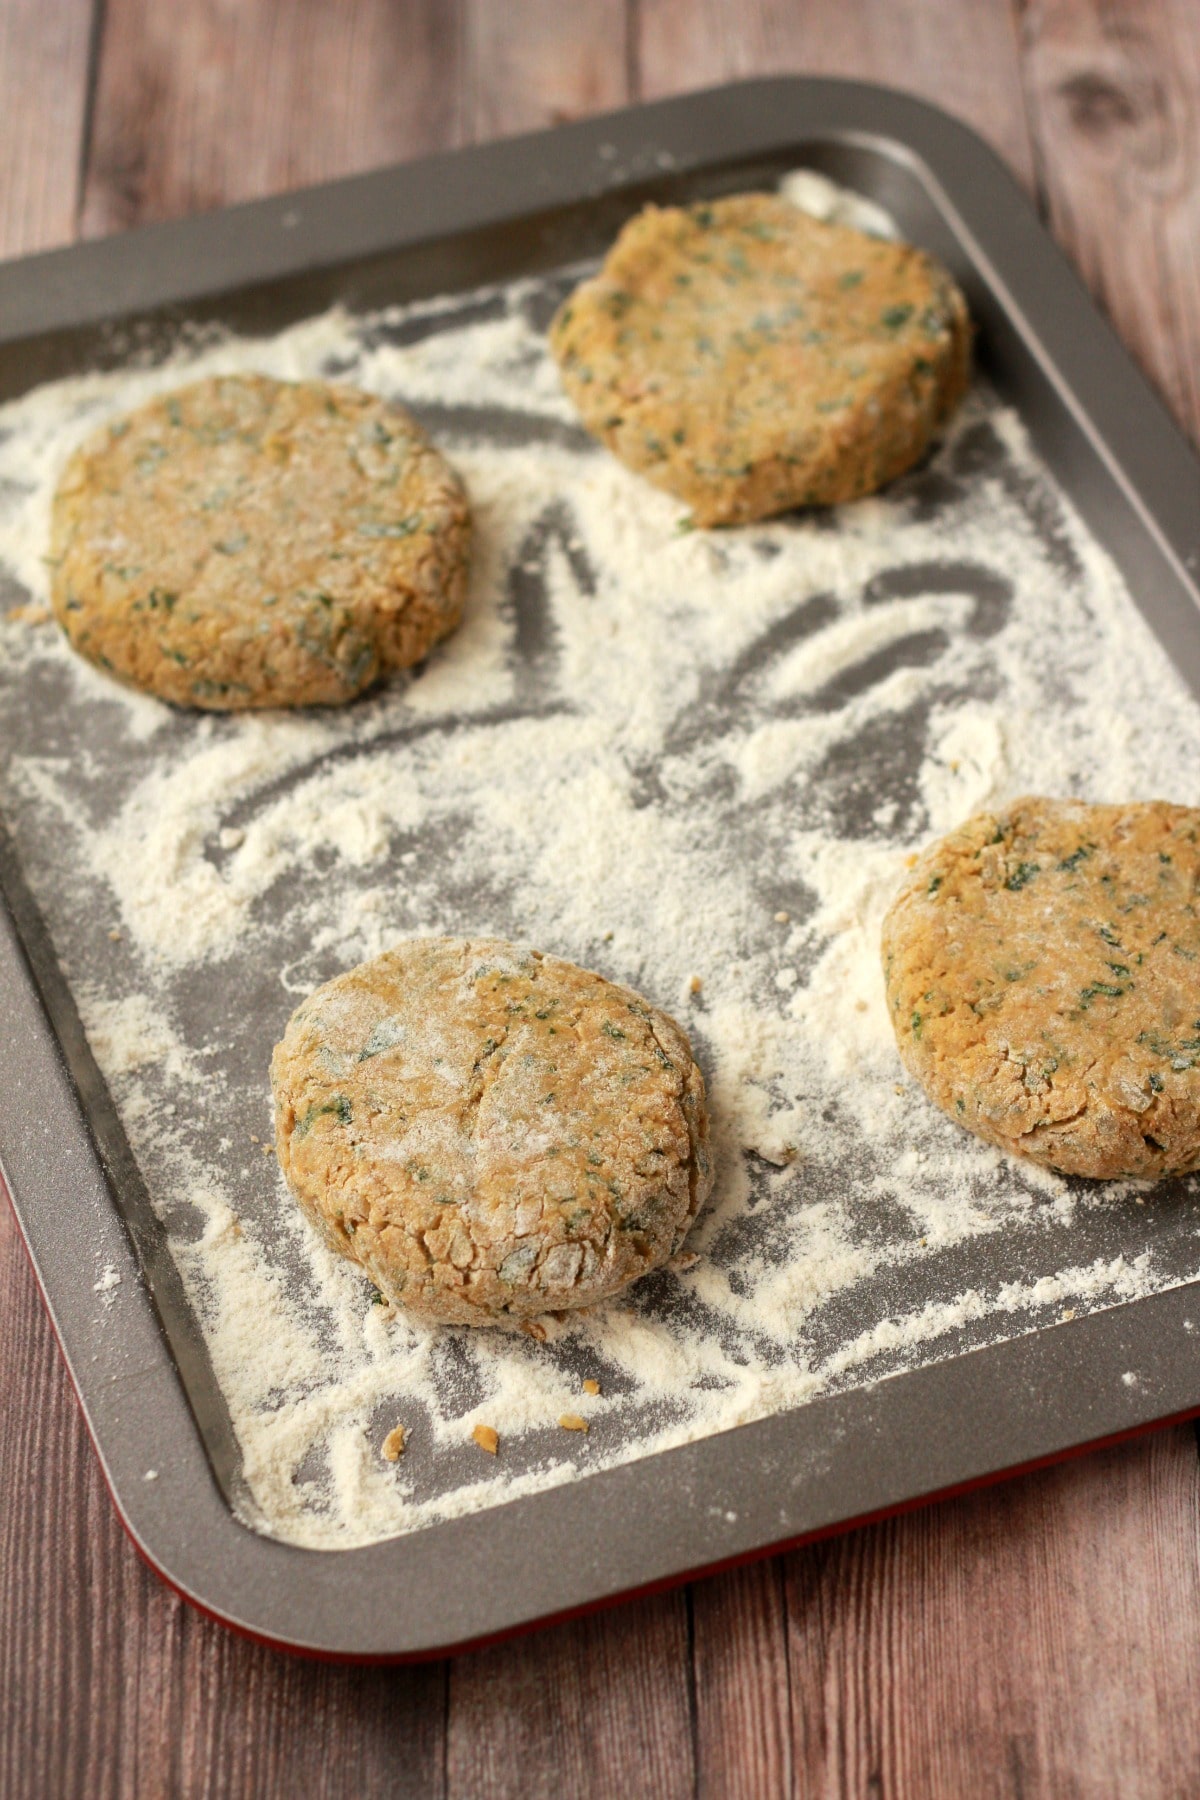 Uncooked vegan chickpea burgers on a flour dusted baking tray. 